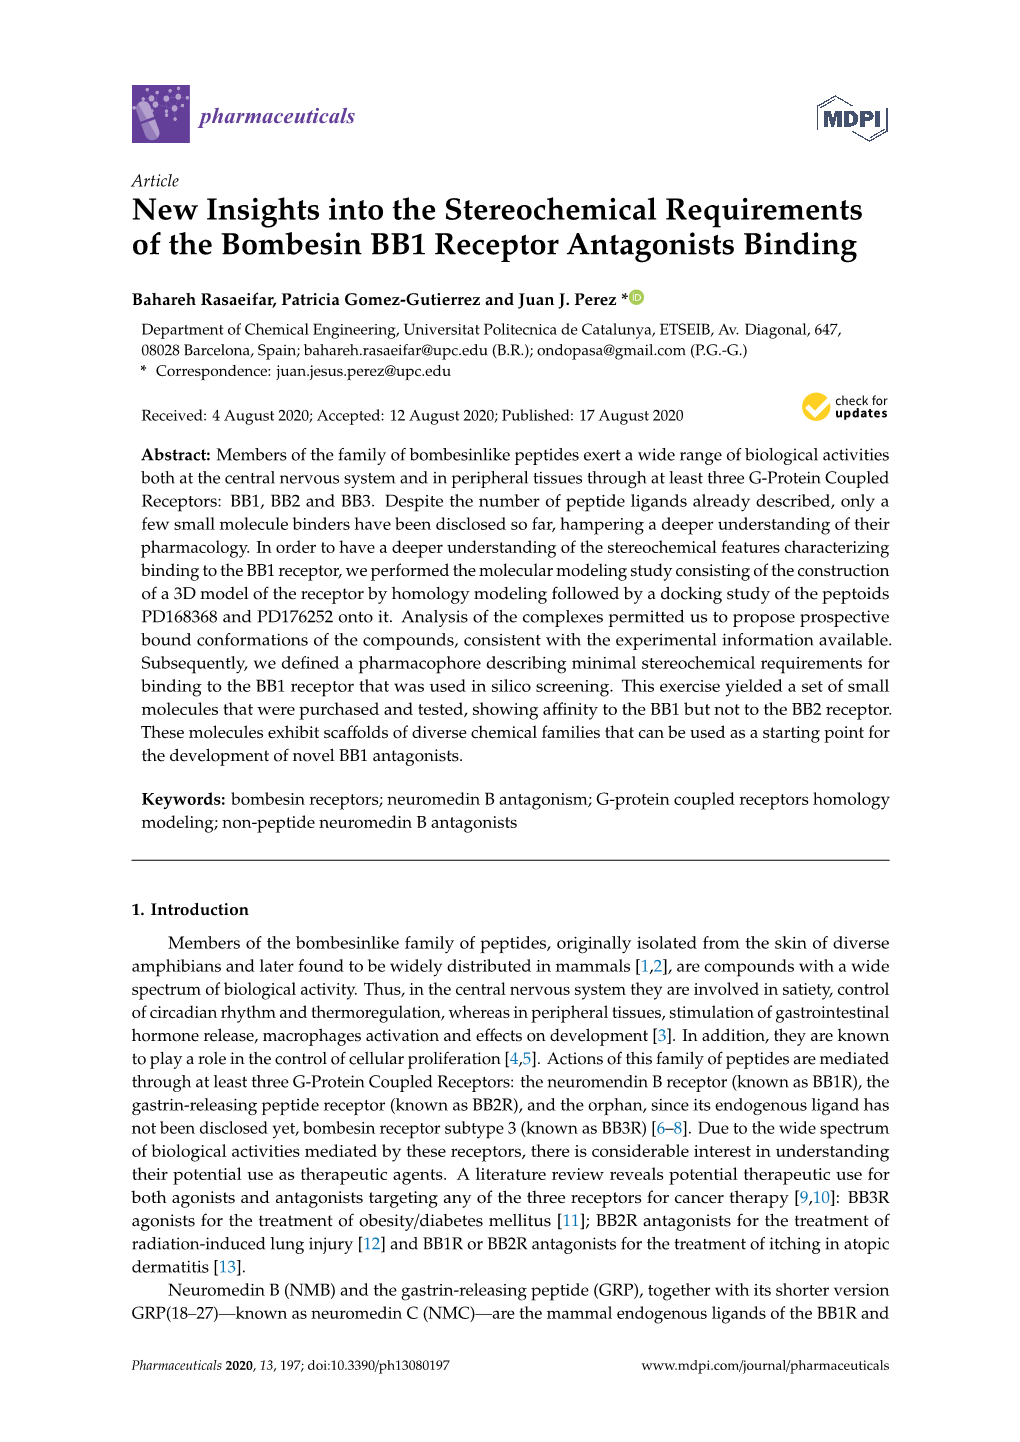 New Insights Into the Stereochemical Requirements of the Bombesin BB1 Receptor Antagonists Binding